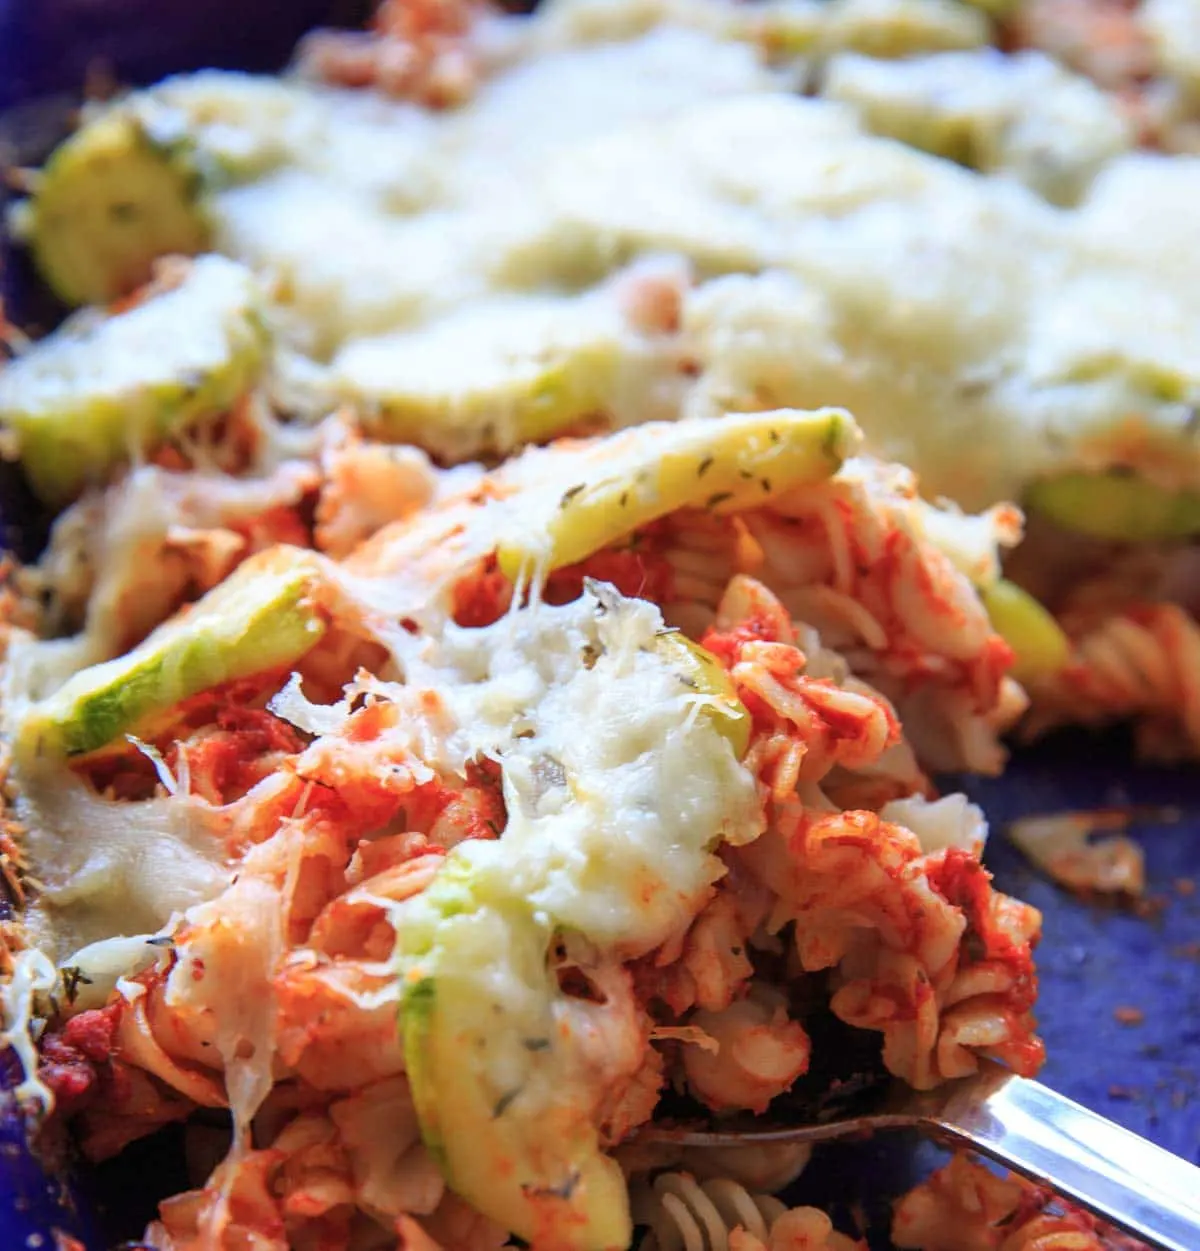 Zucchini Pasta Casserole with thyme. A super easy and healthy casserole that is healthy and easily gluten-free. With few ingredients (5 ingredients or less), dinner will be on the table in no time! Up close shot of pasta casserole.